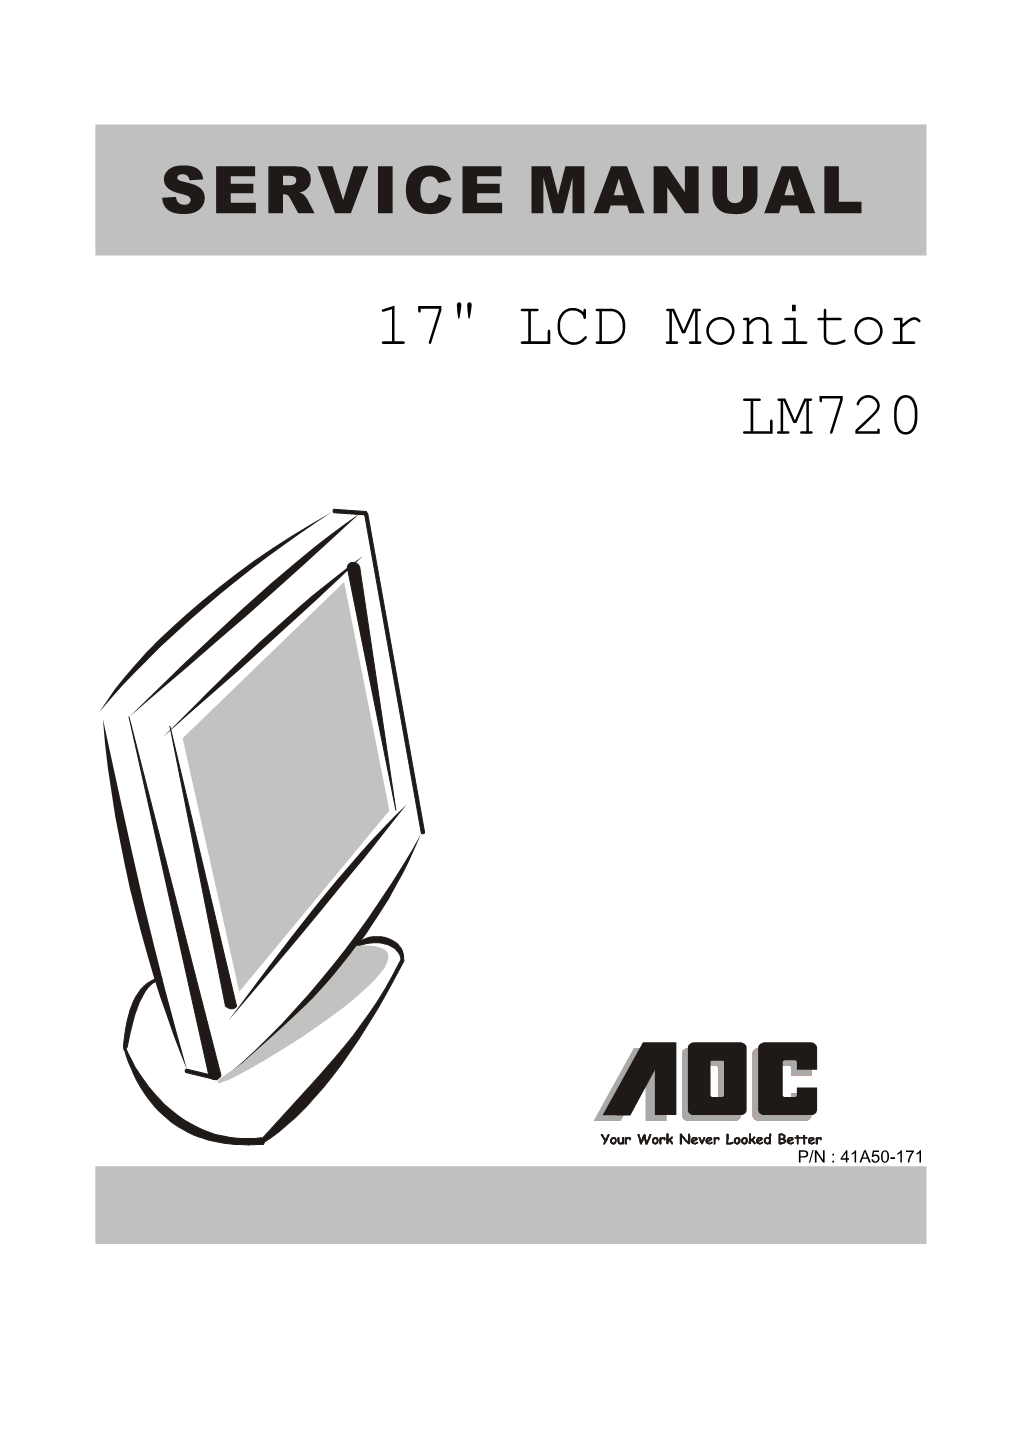 1. Specifications for Lcd Monitor